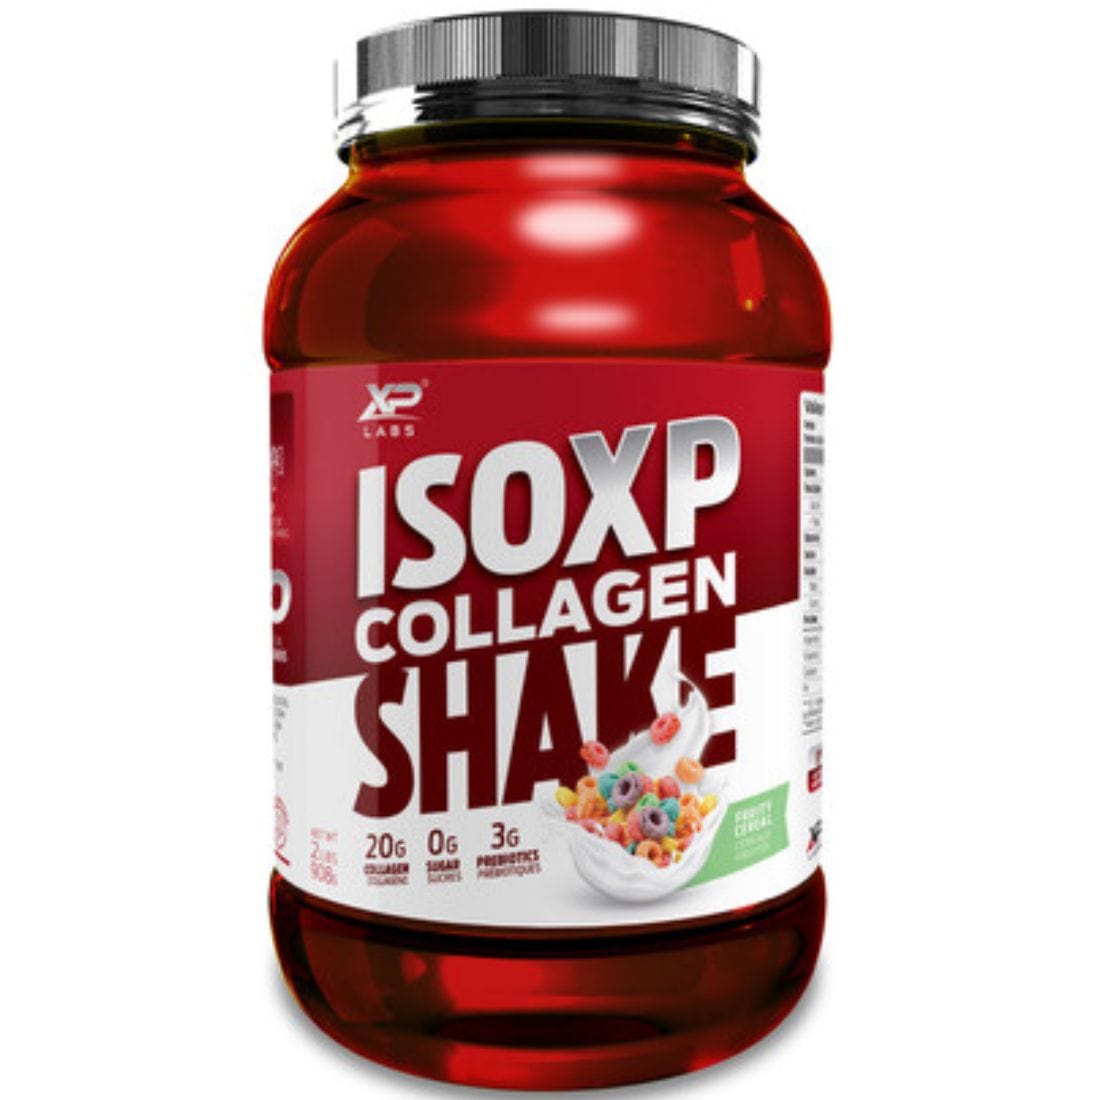 XP Labs Iso XP Collagen Shake, 20g of Grass-Fed Collagen, 2lb